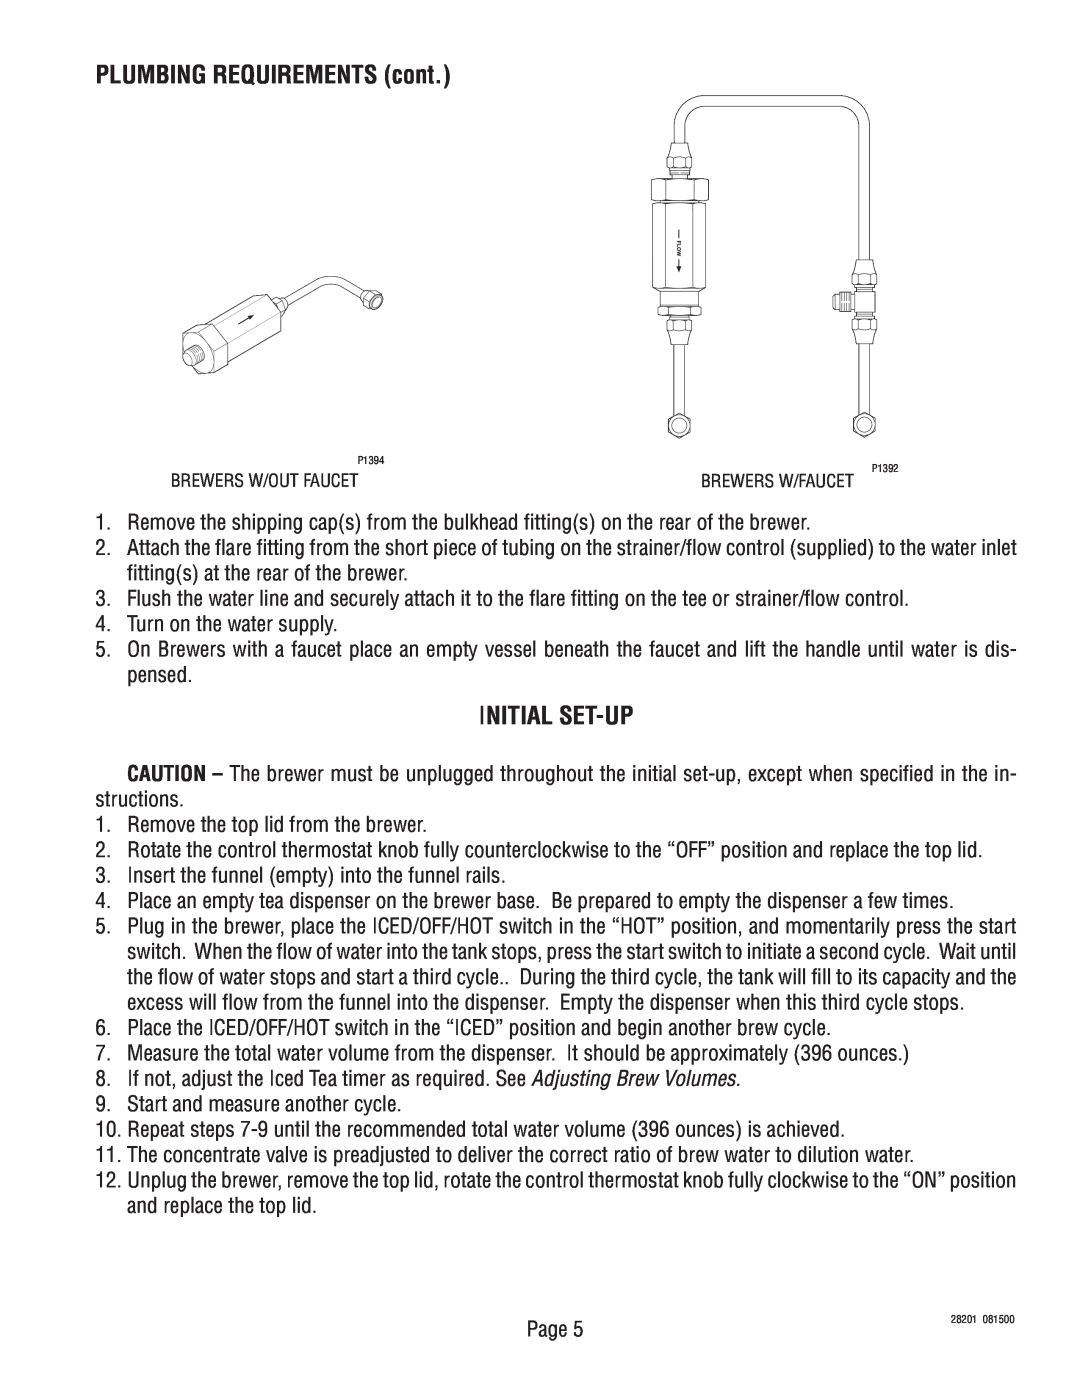 Bunn TNTF-3 service manual PLUMBING REQUIREMENTS cont, Initial Set-Up, Brewers W/Out Faucet, Brewers W/Faucet 